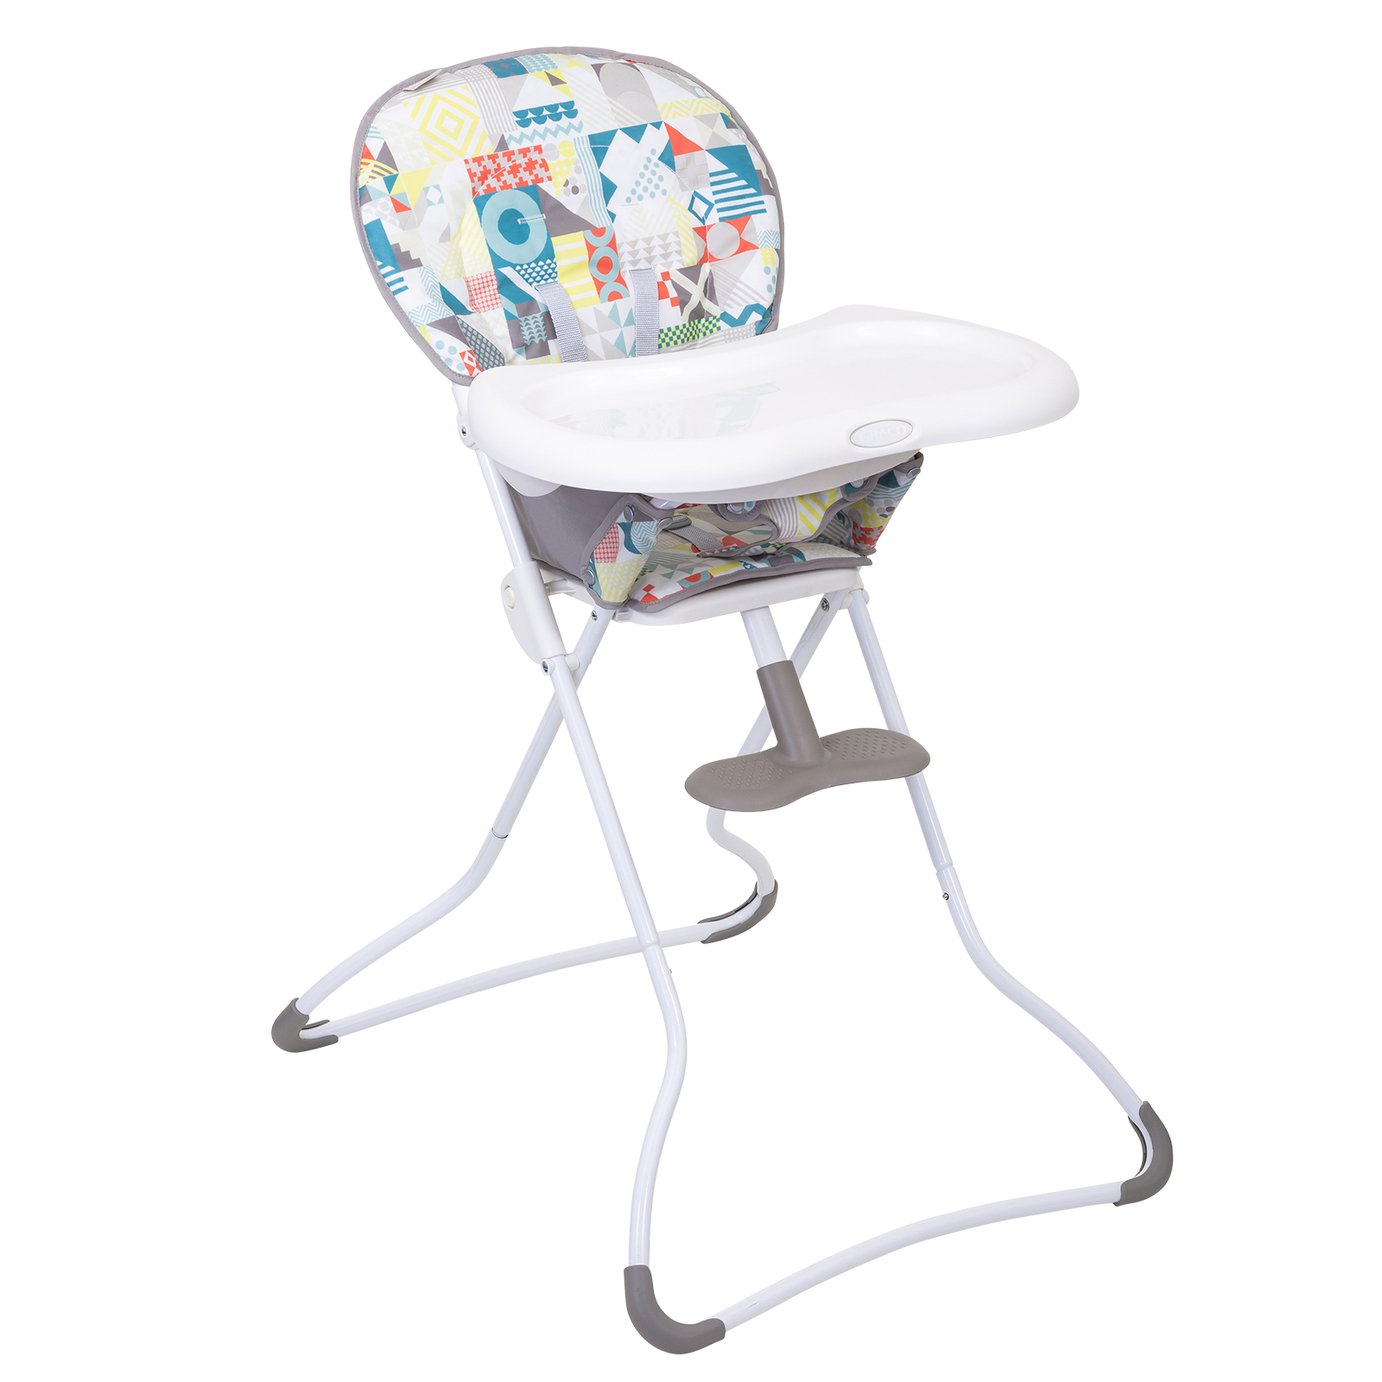 Graco Snack N Stow Highchair Review